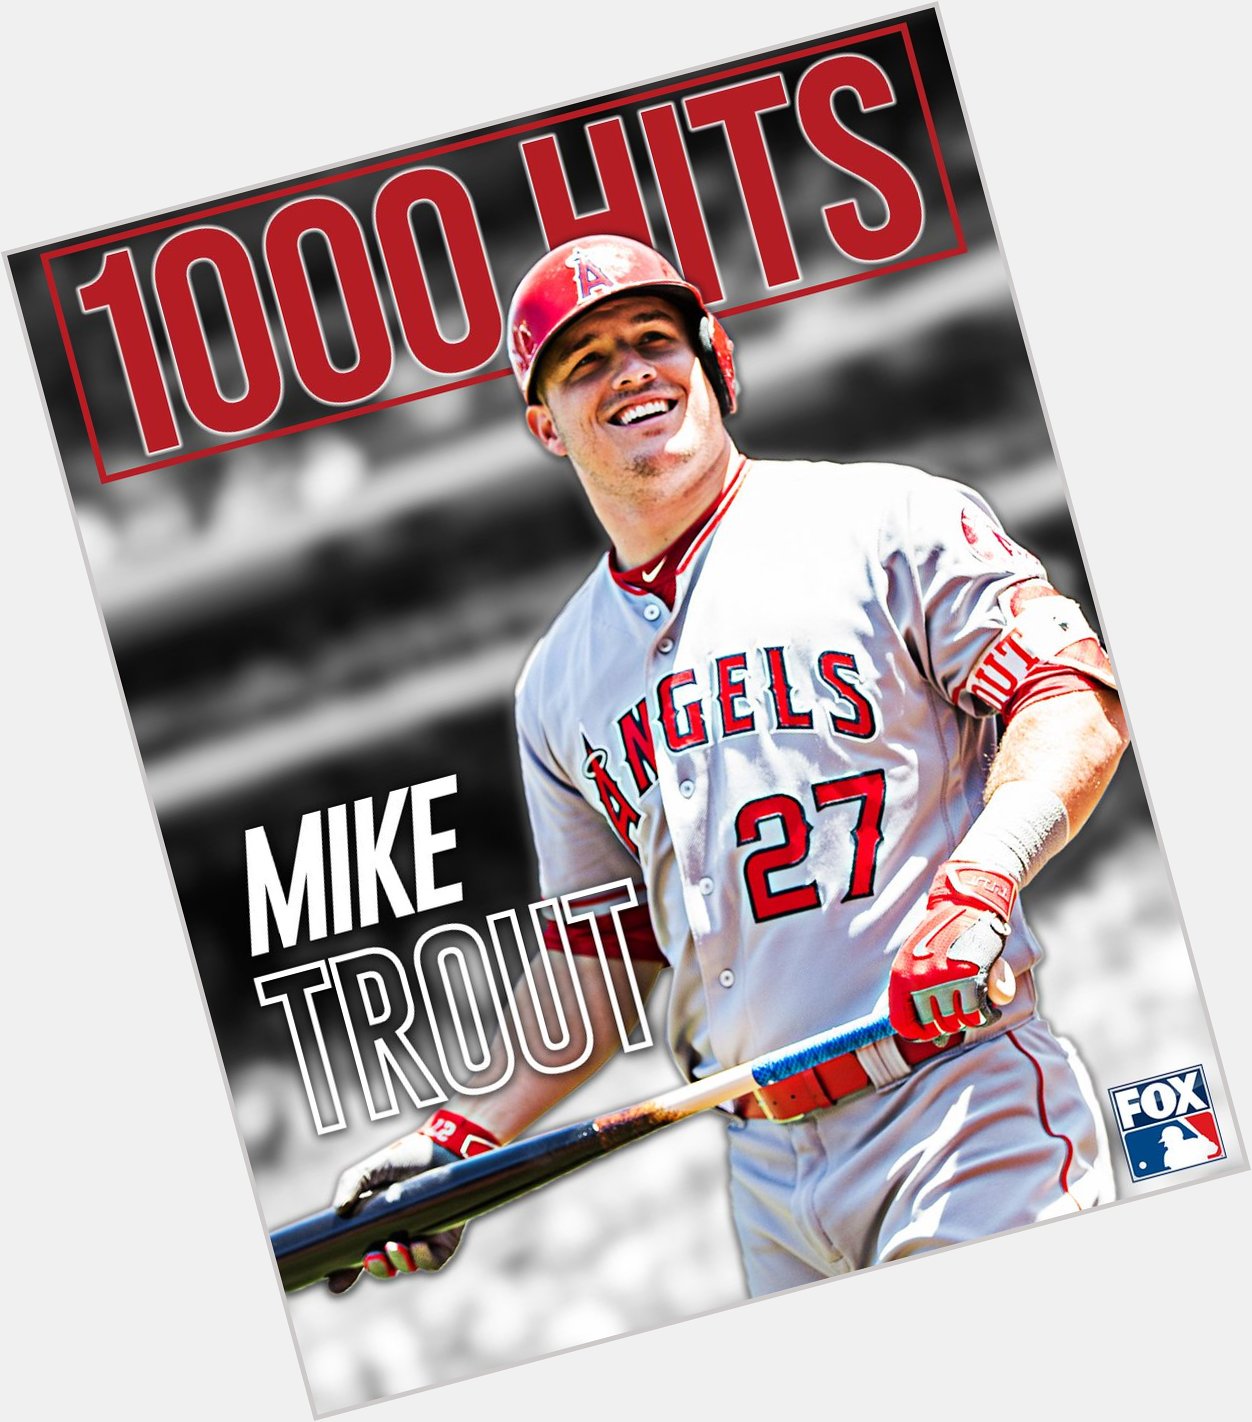 A happy birthday, indeed! 

Mike Trout gets his 1,000th career hit! 